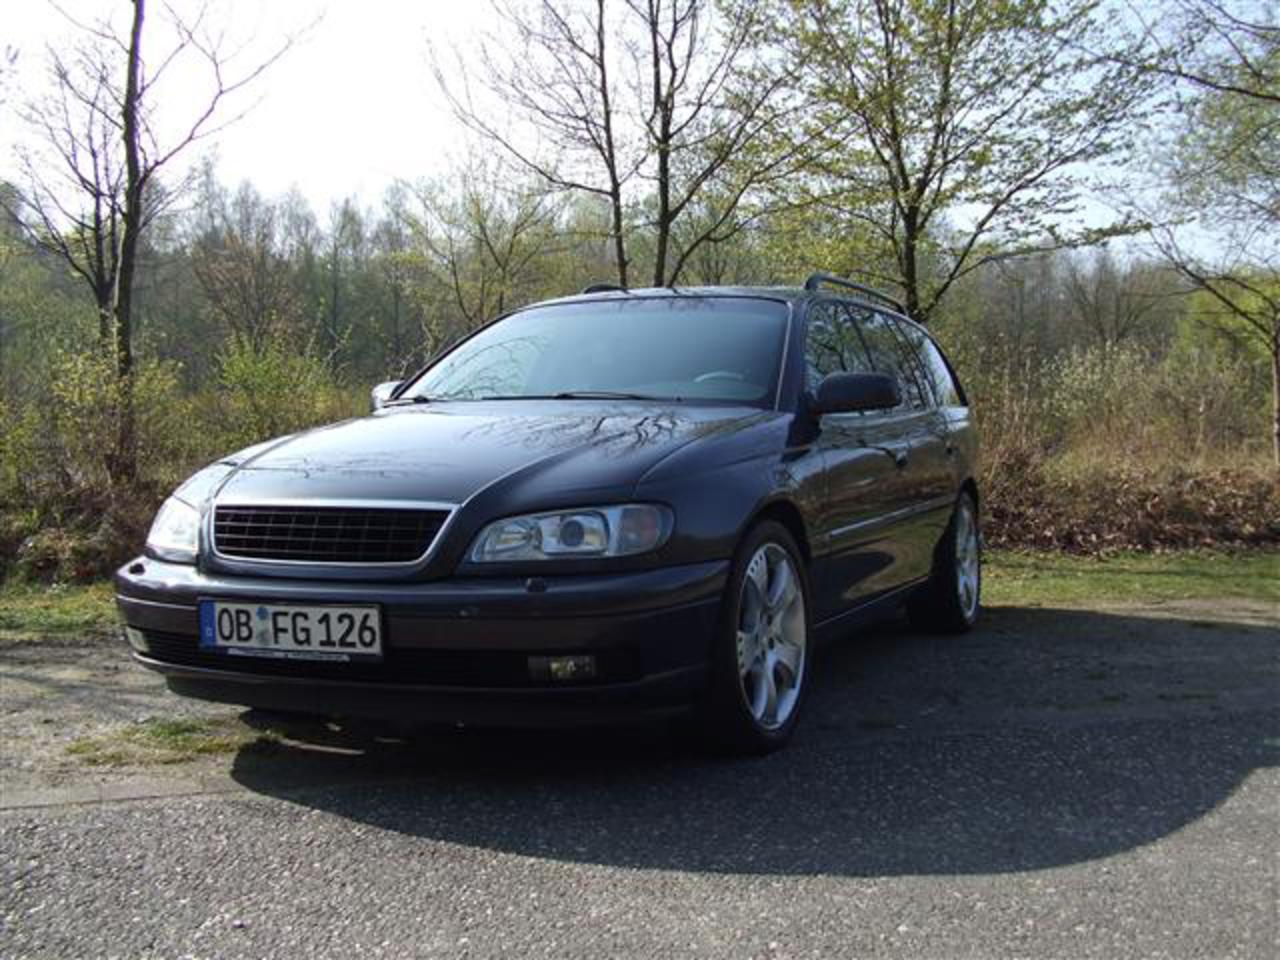 Opel Omega-B Y22XE. View Download Wallpaper. 640x480. Comments